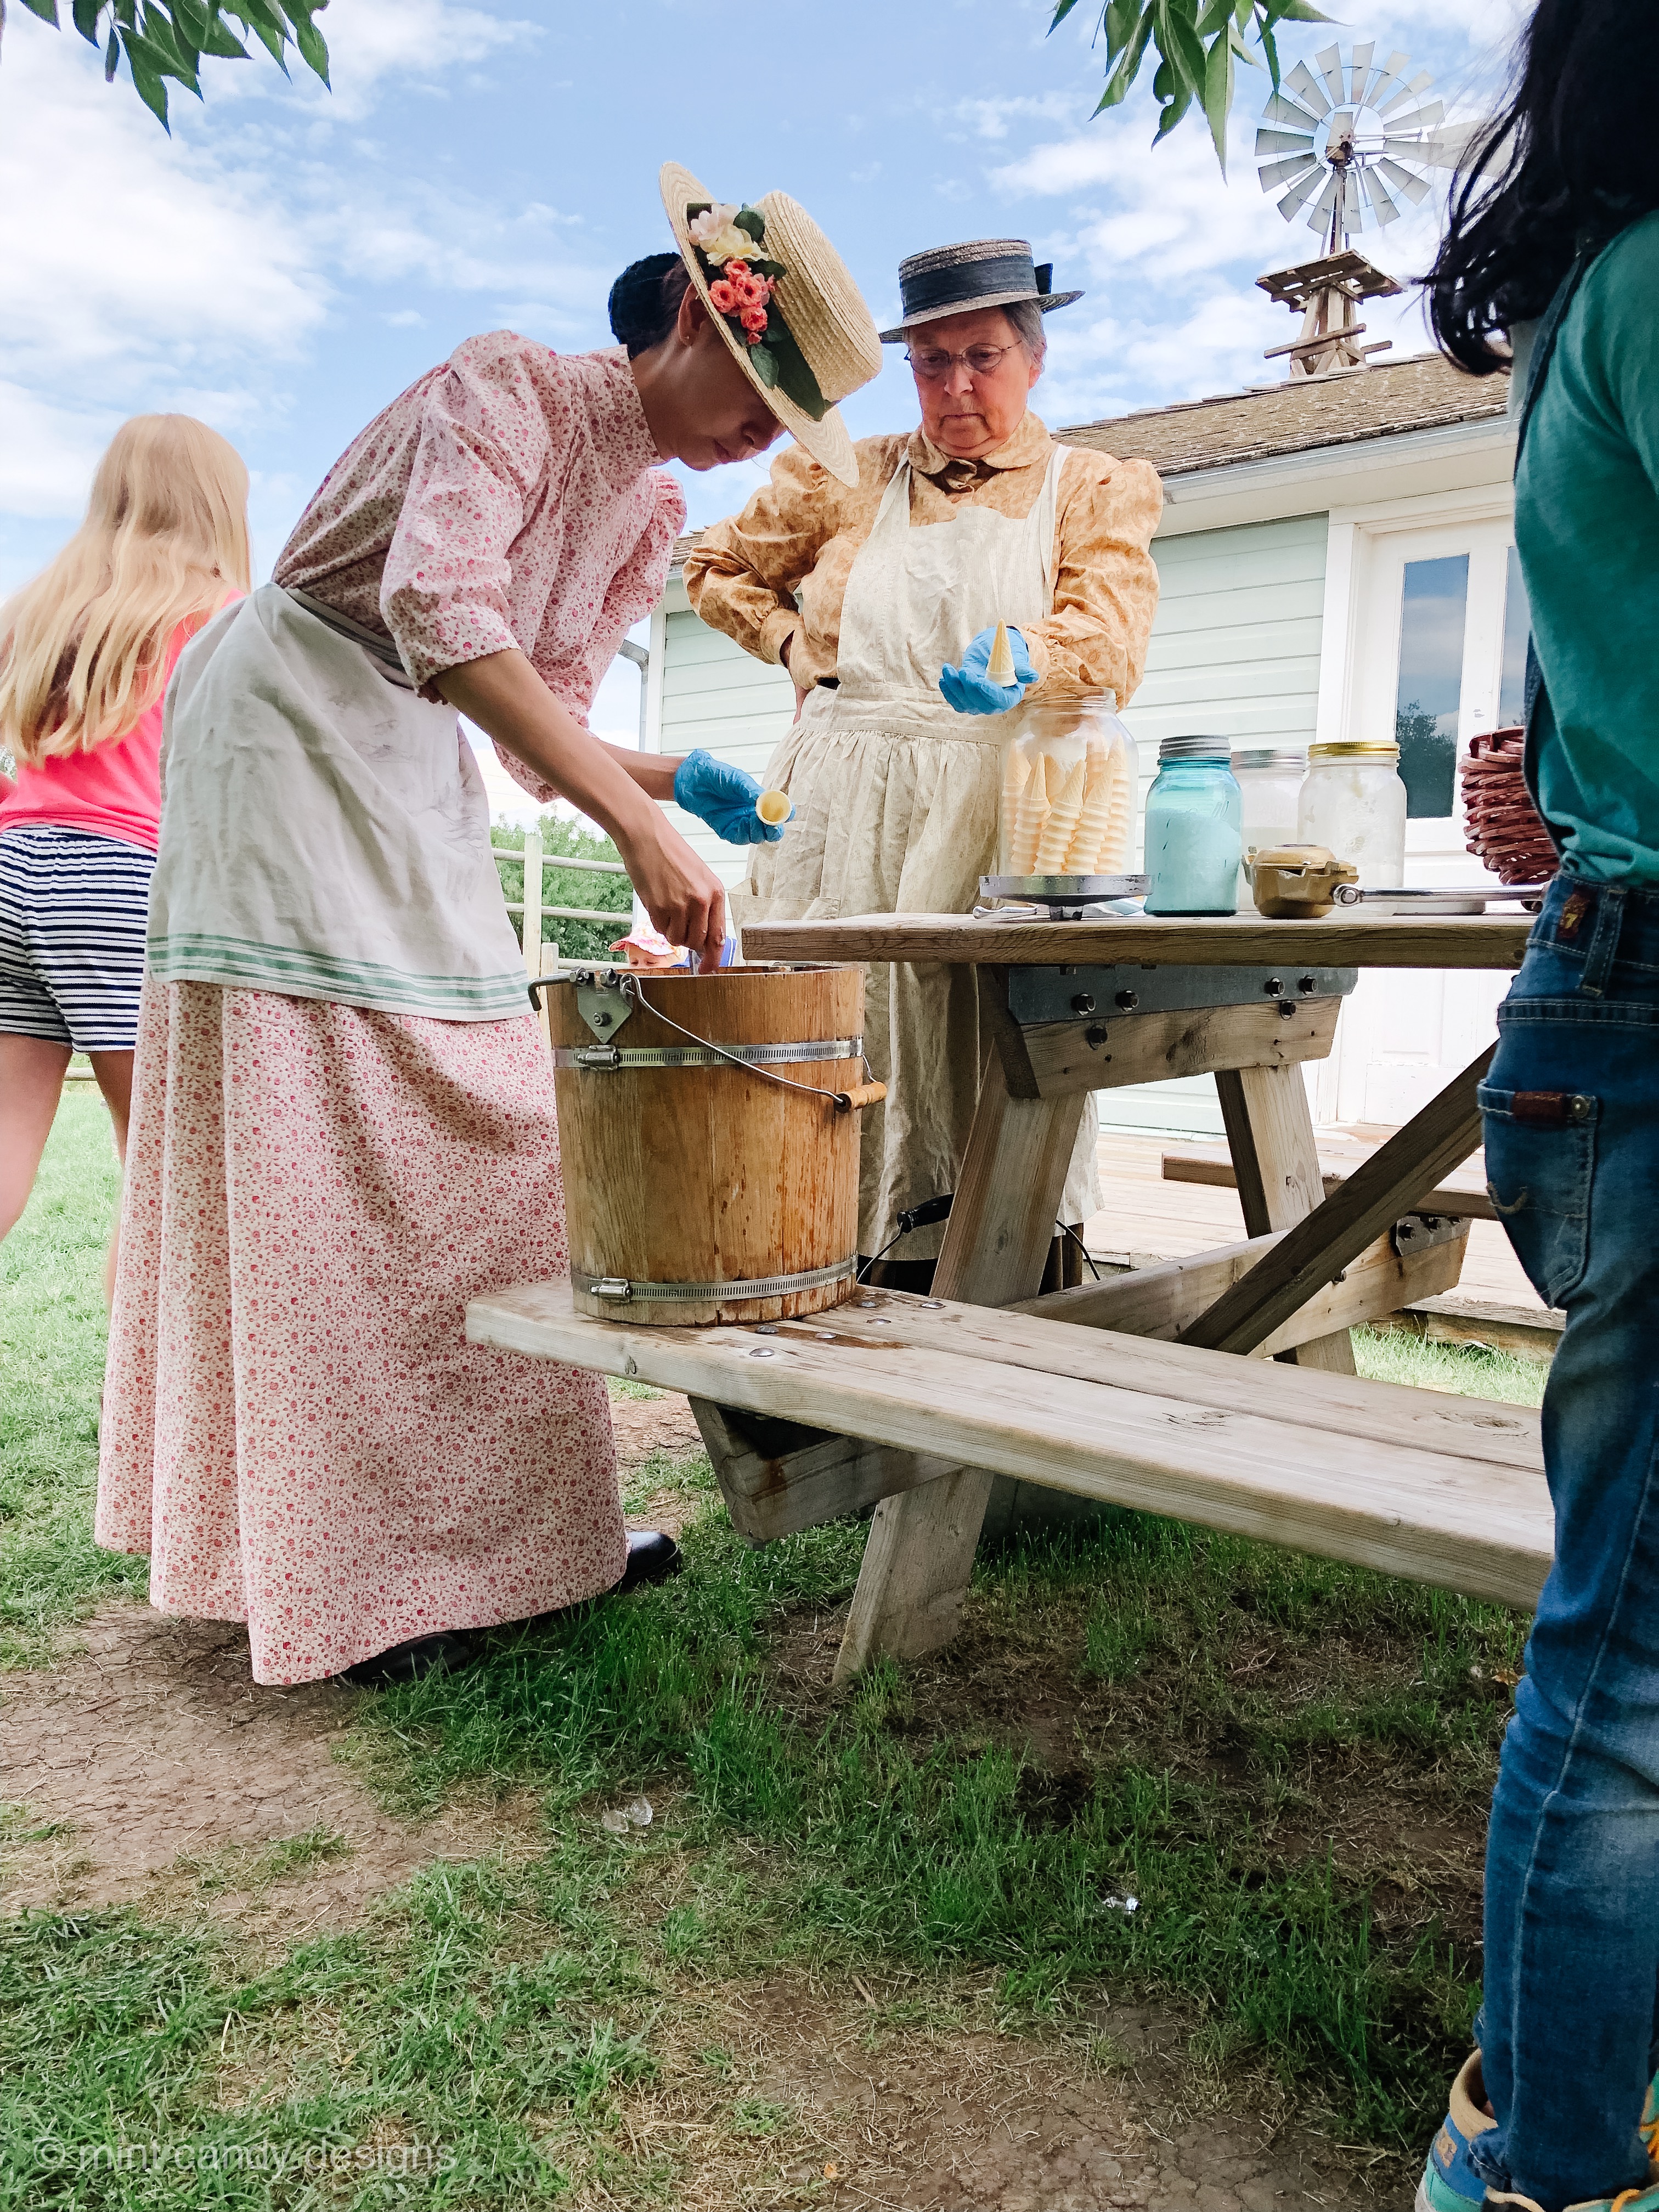 Making ice cream at Heritage Park in Calgary